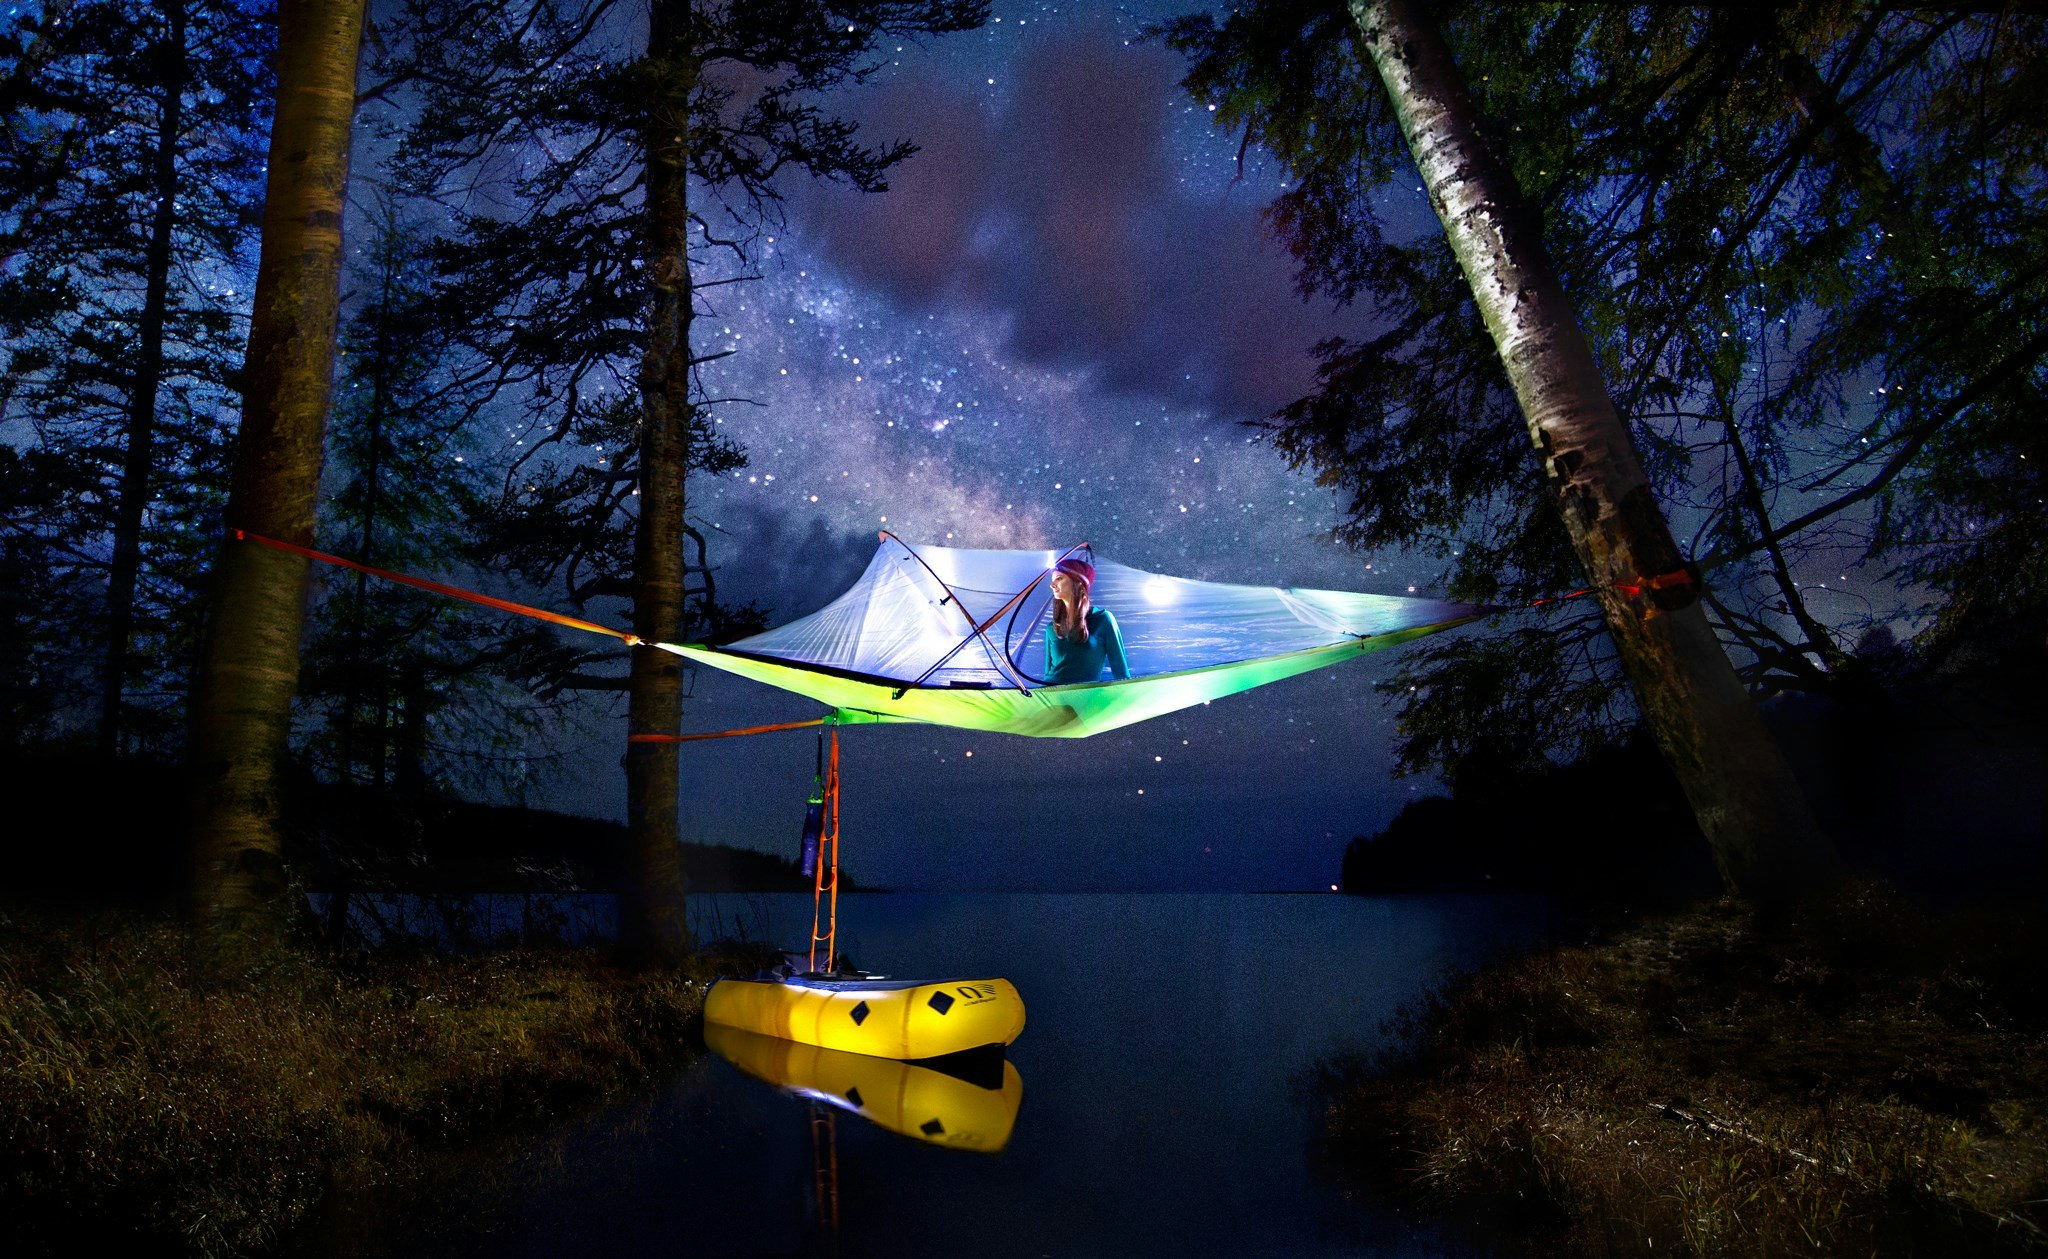 A woman sits perched in a Tentsile tree tent over a watery inlet. The Tentsile is illuminated against the night sky, and you can see she's moored a yellow raft to the tent, which is fastened to three nearby trees.